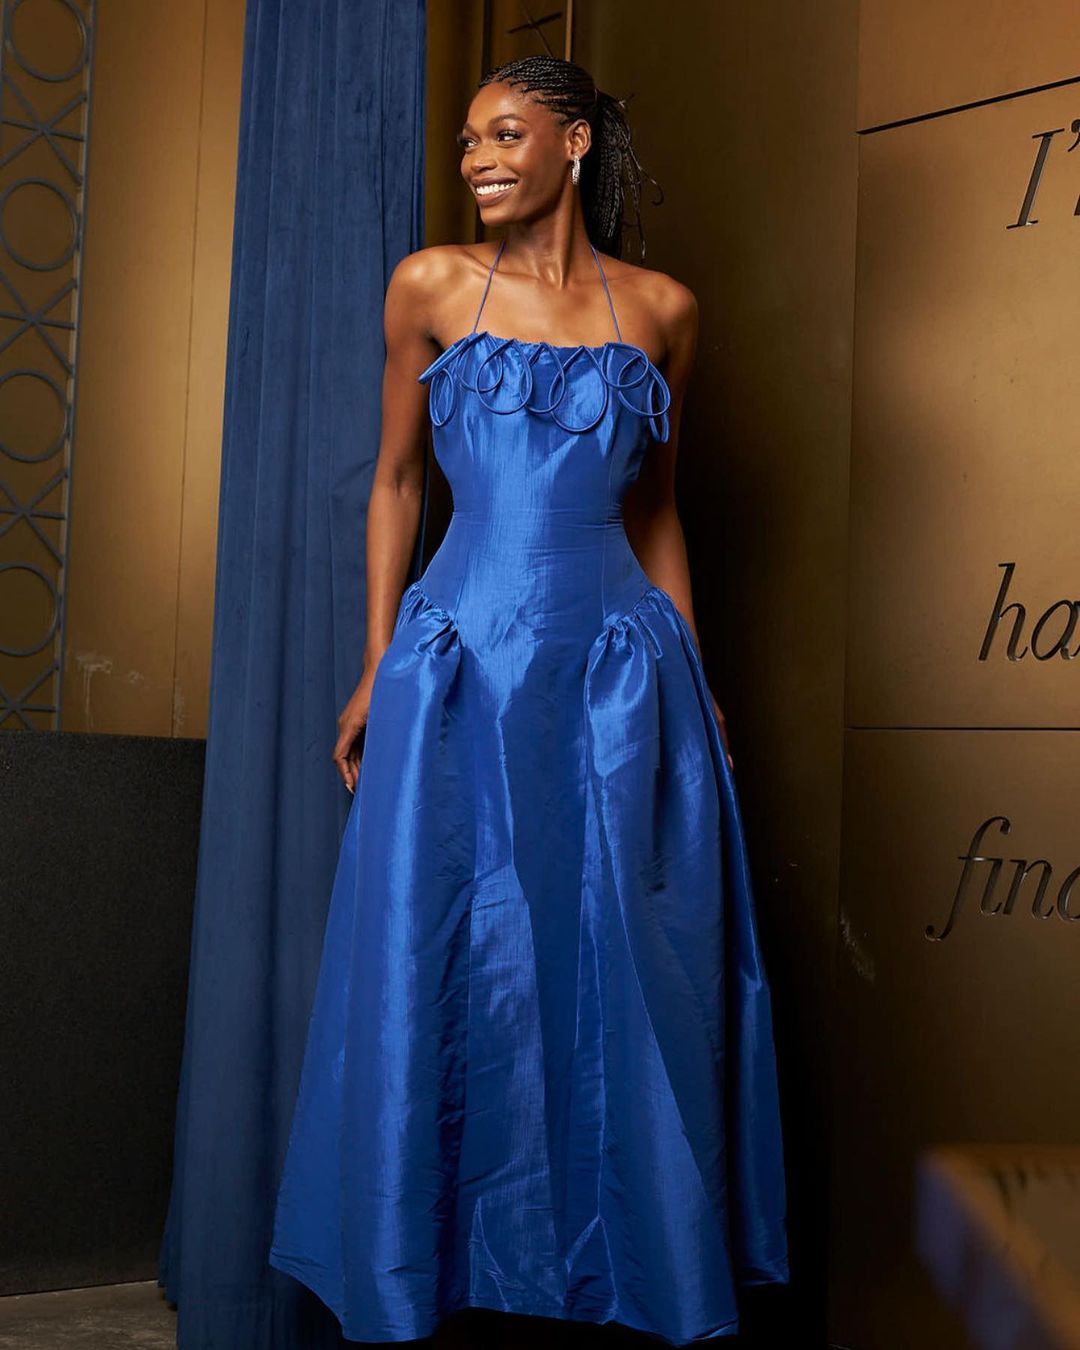 BLACK WOMAN IN A NAVY-BLUE EVENING DRESS IN COLOR